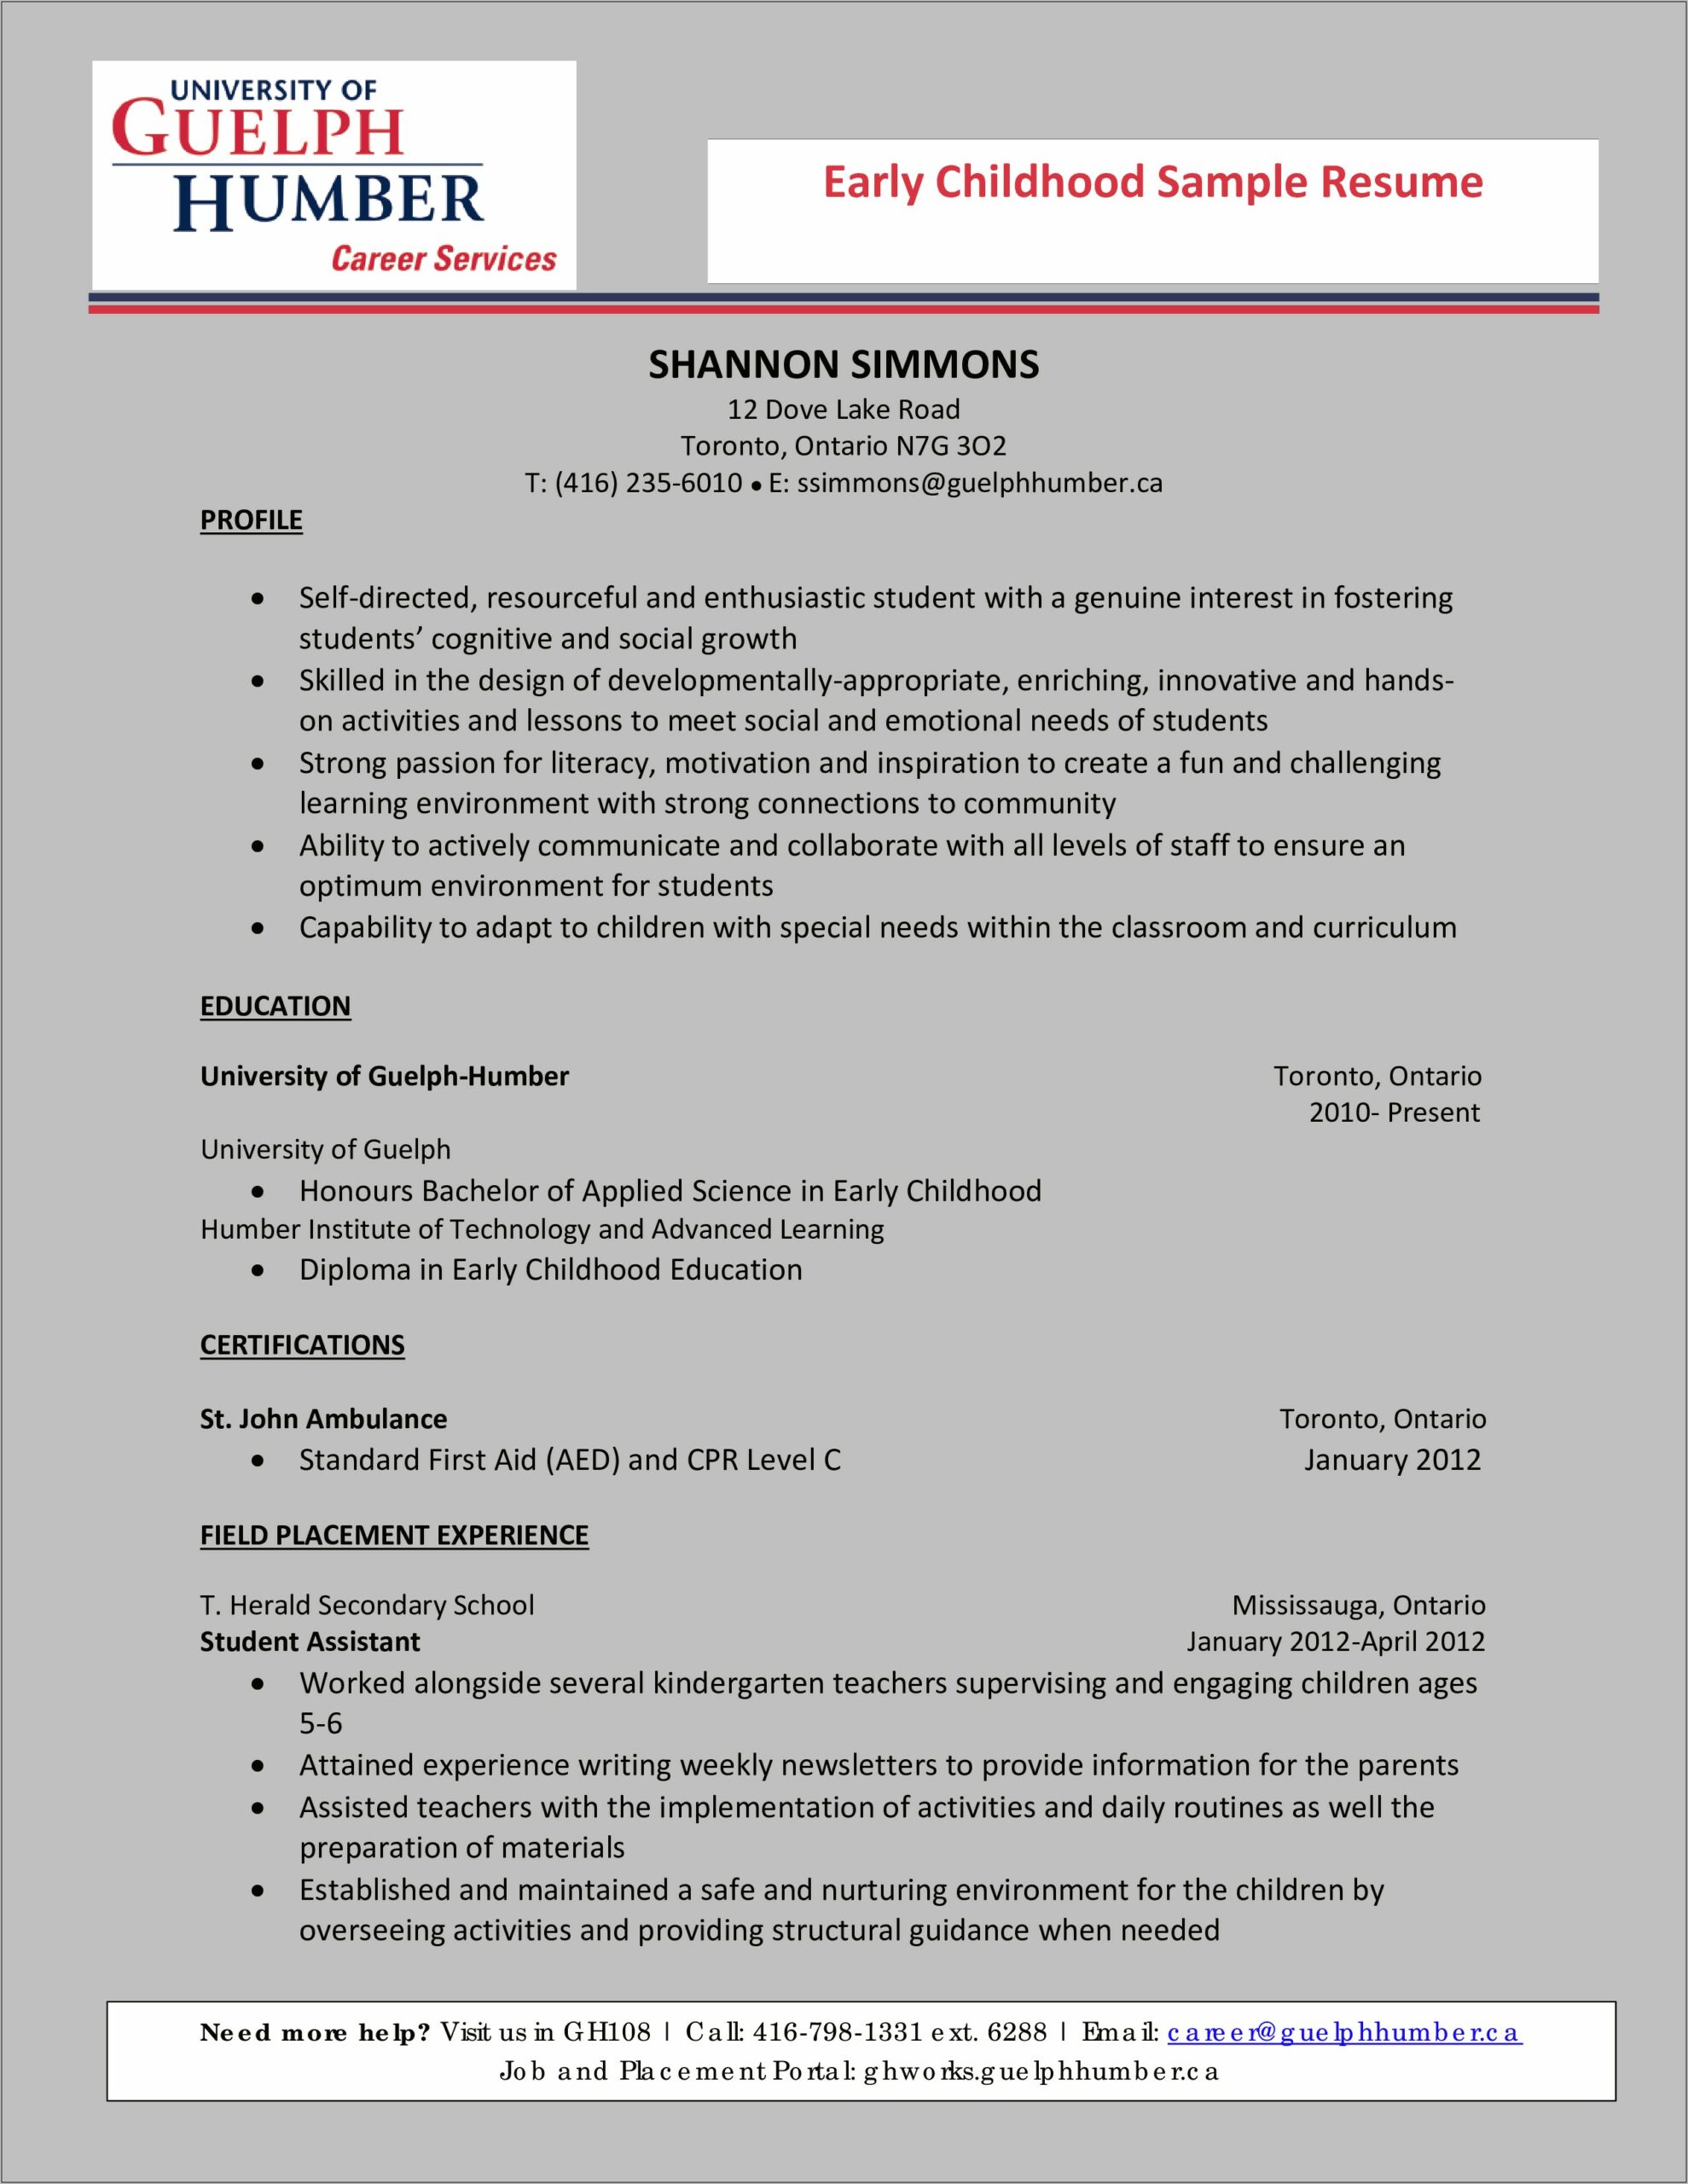 Example Of Resume Early Childhood Teacher